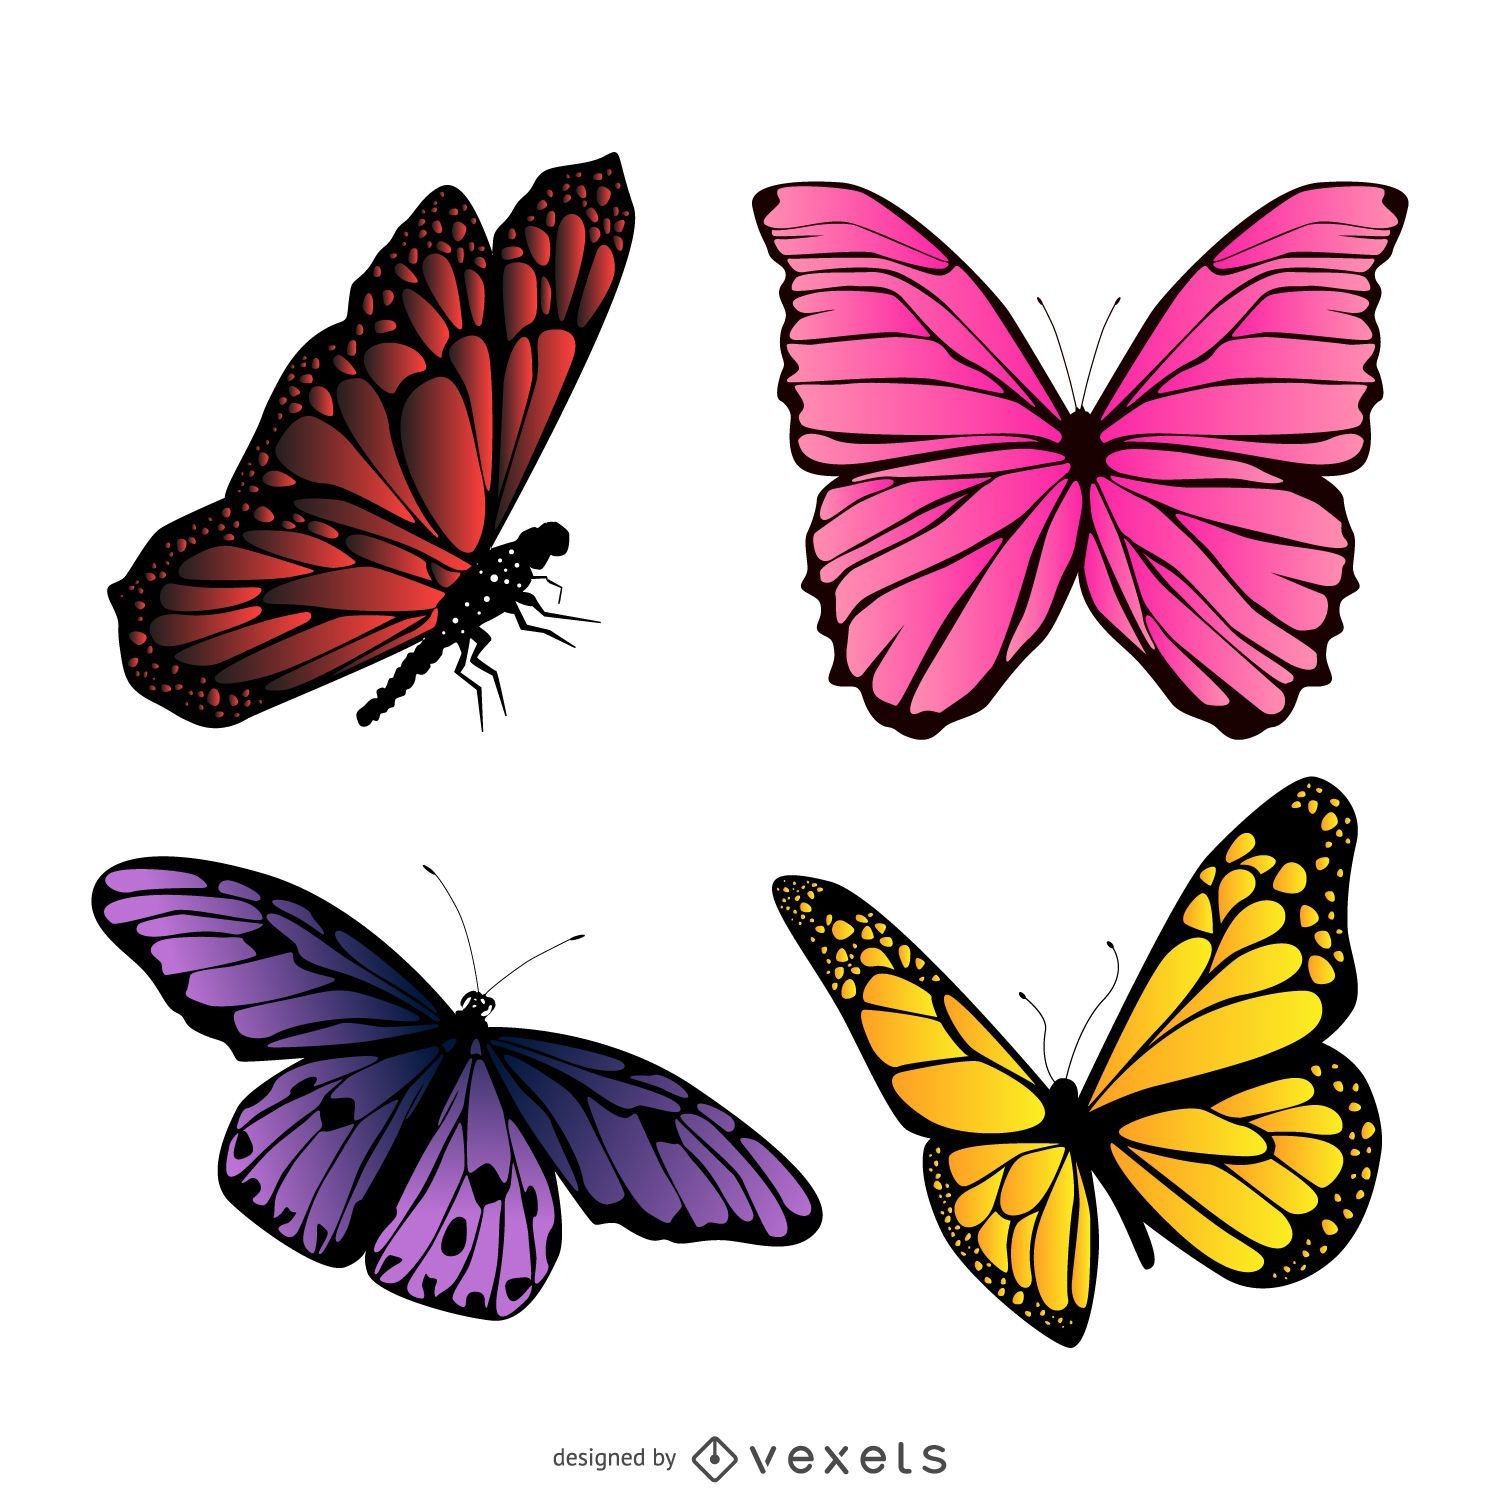 Colorful butterfly illustration set